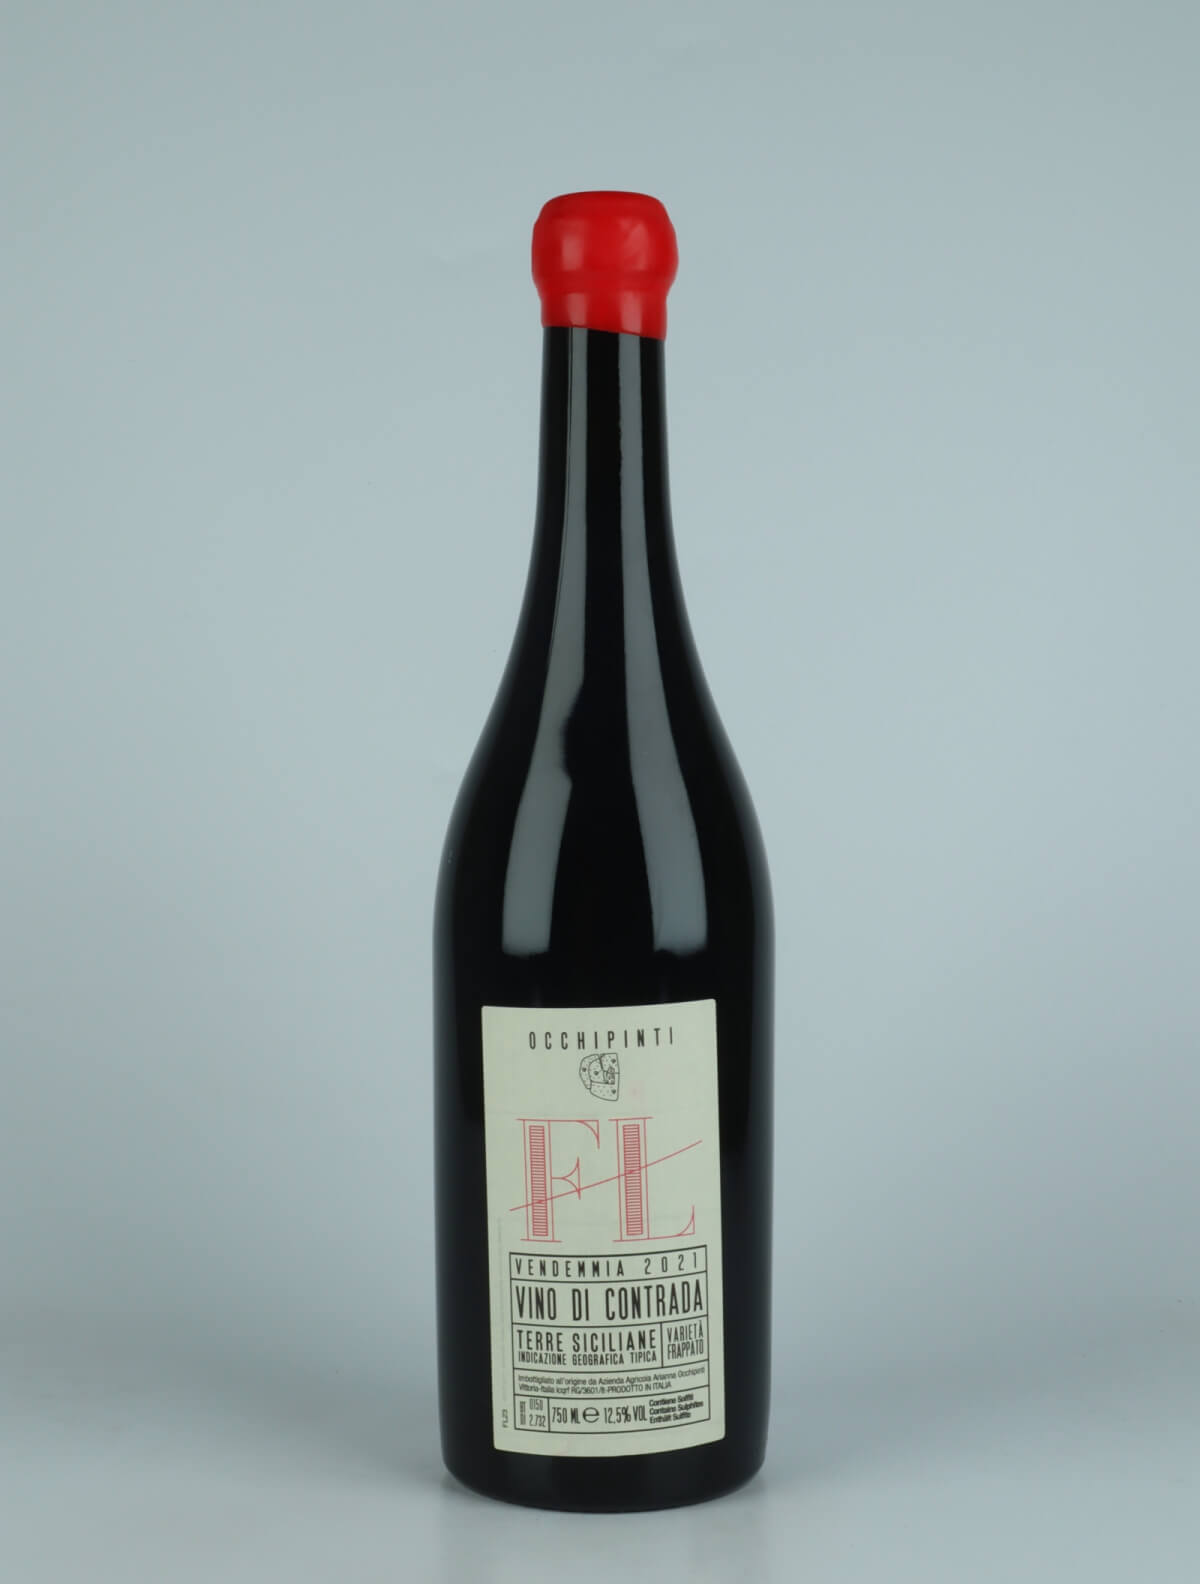 A bottle 2021 Fossa di Lupo Red wine from Arianna Occhipinti, Sicily in Italy